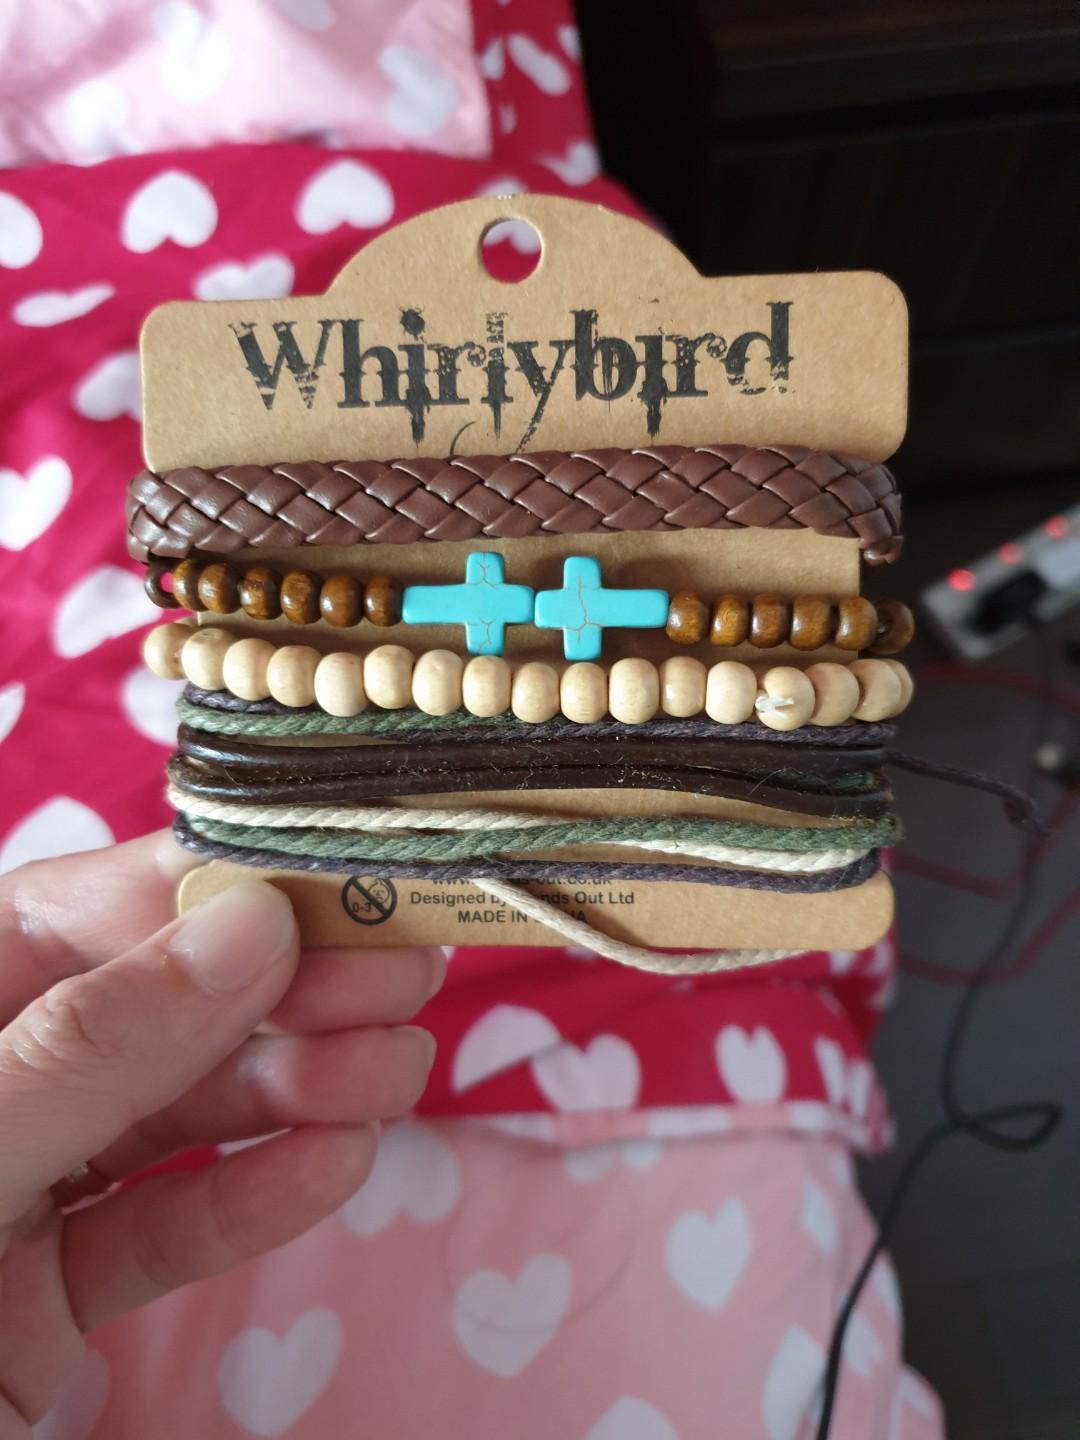 Aggregate more than 79 whirlybird bracelets latest